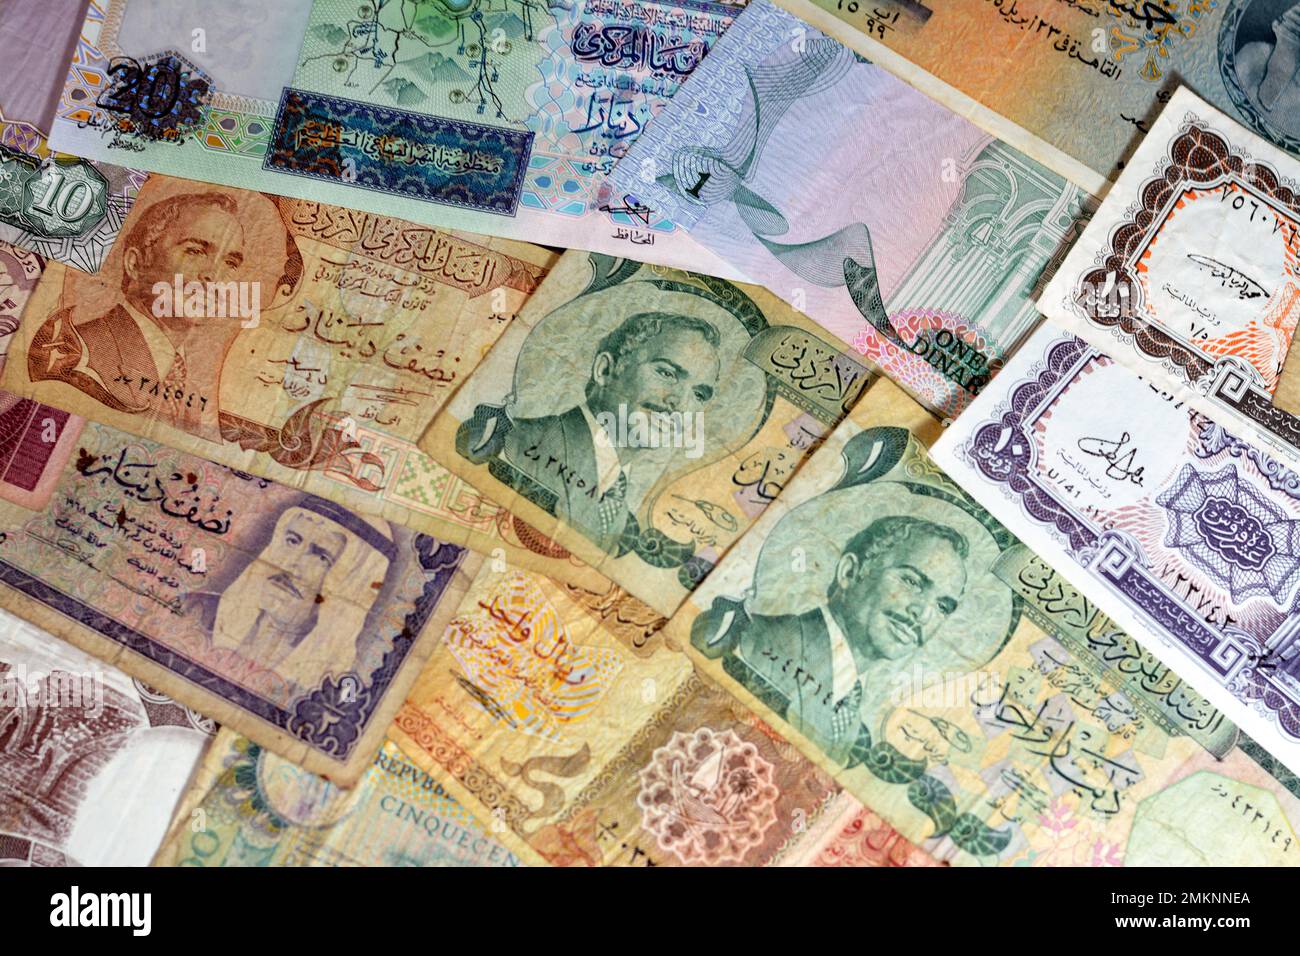 various old cash money banknotes from different countries of the world, stack of multiple currencies, pile of vintage retro bills of different origins Stock Photo